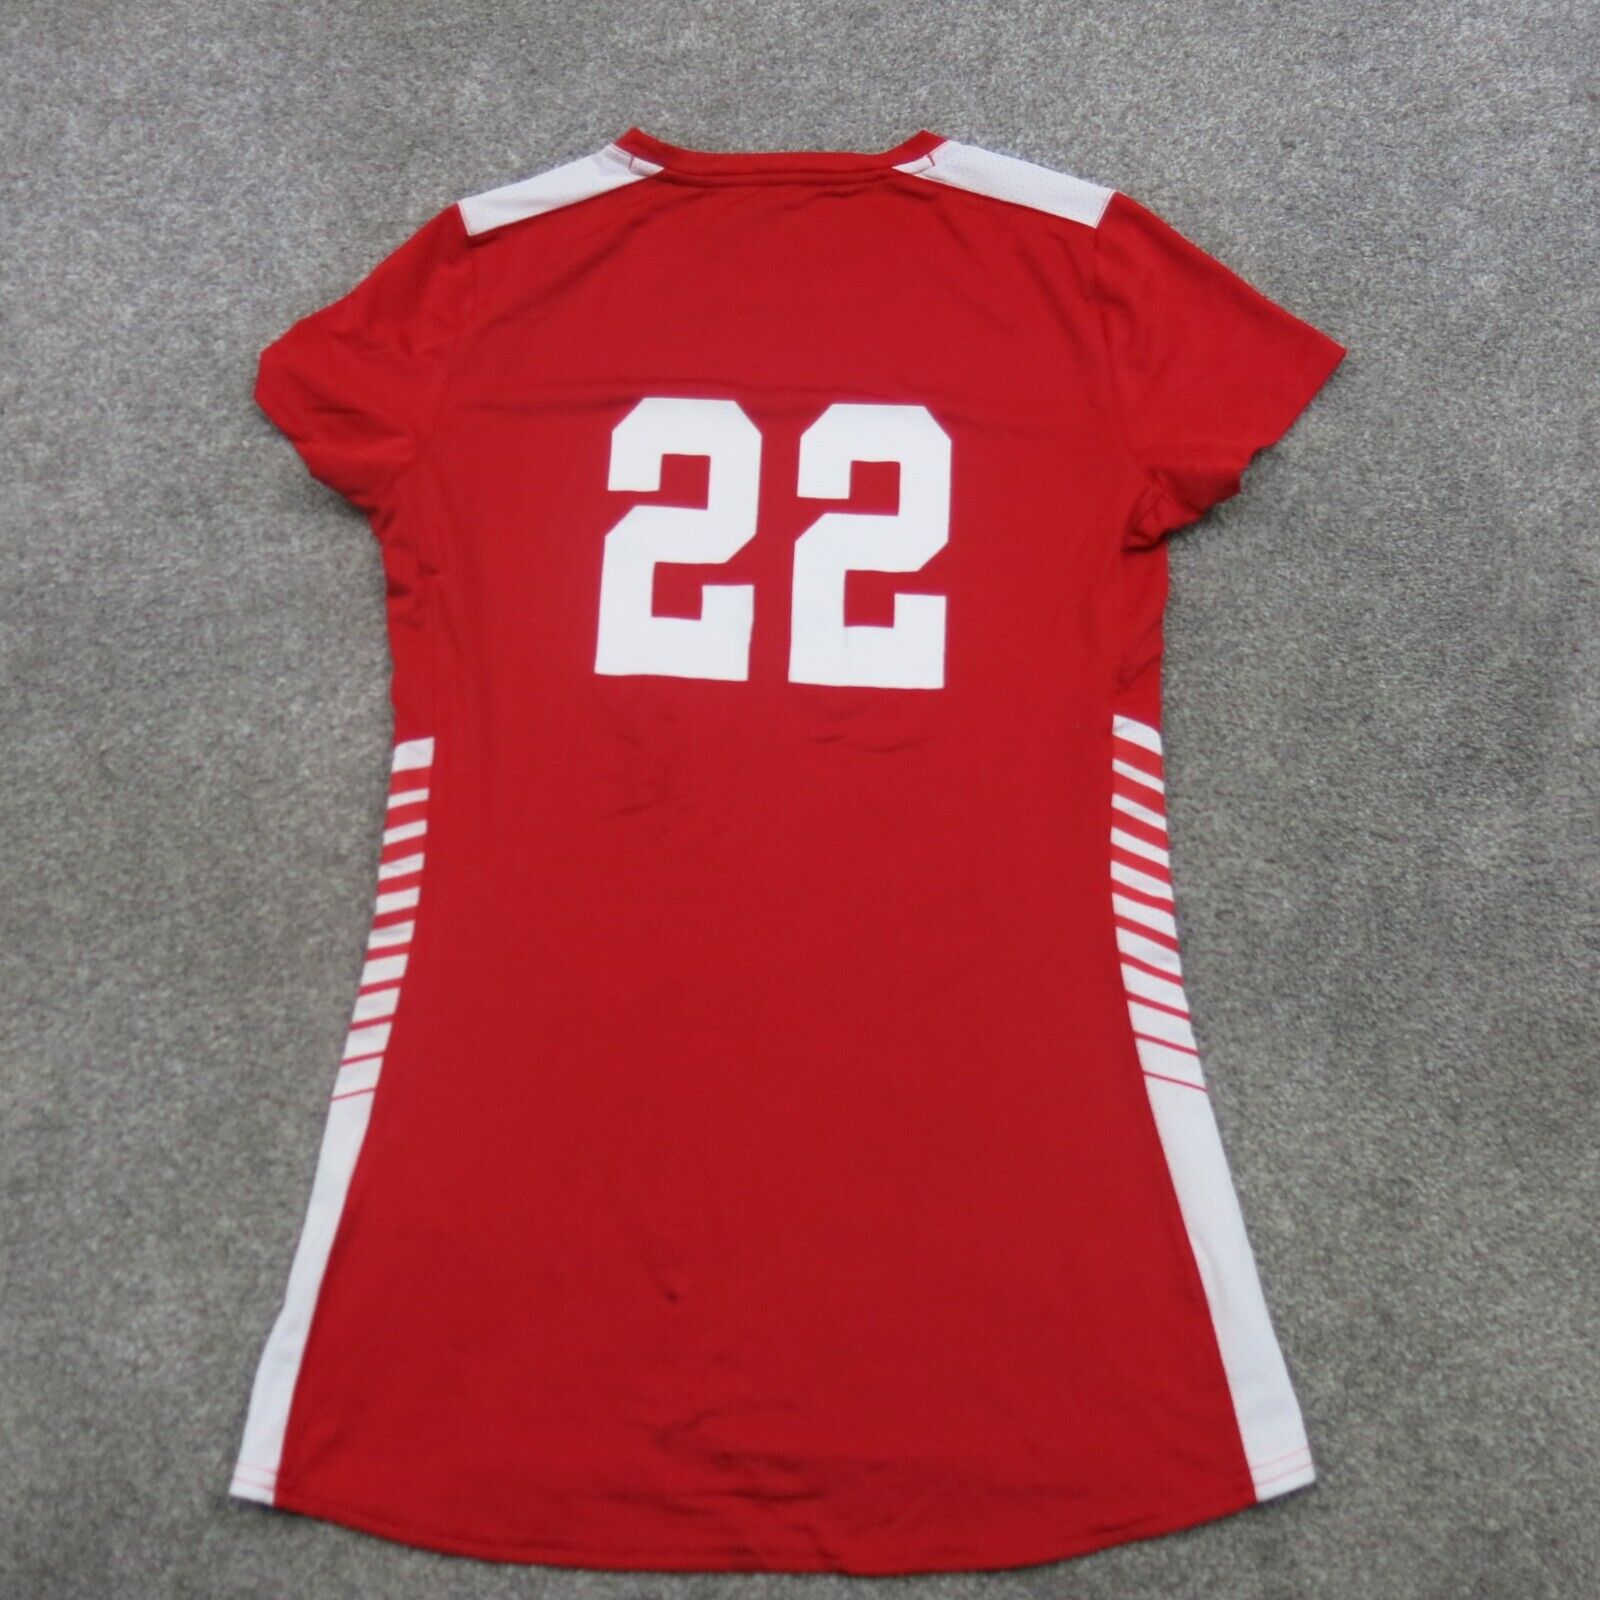 Under Armour Jersey Shirt Women Size XS Red White Solid Crew Neck